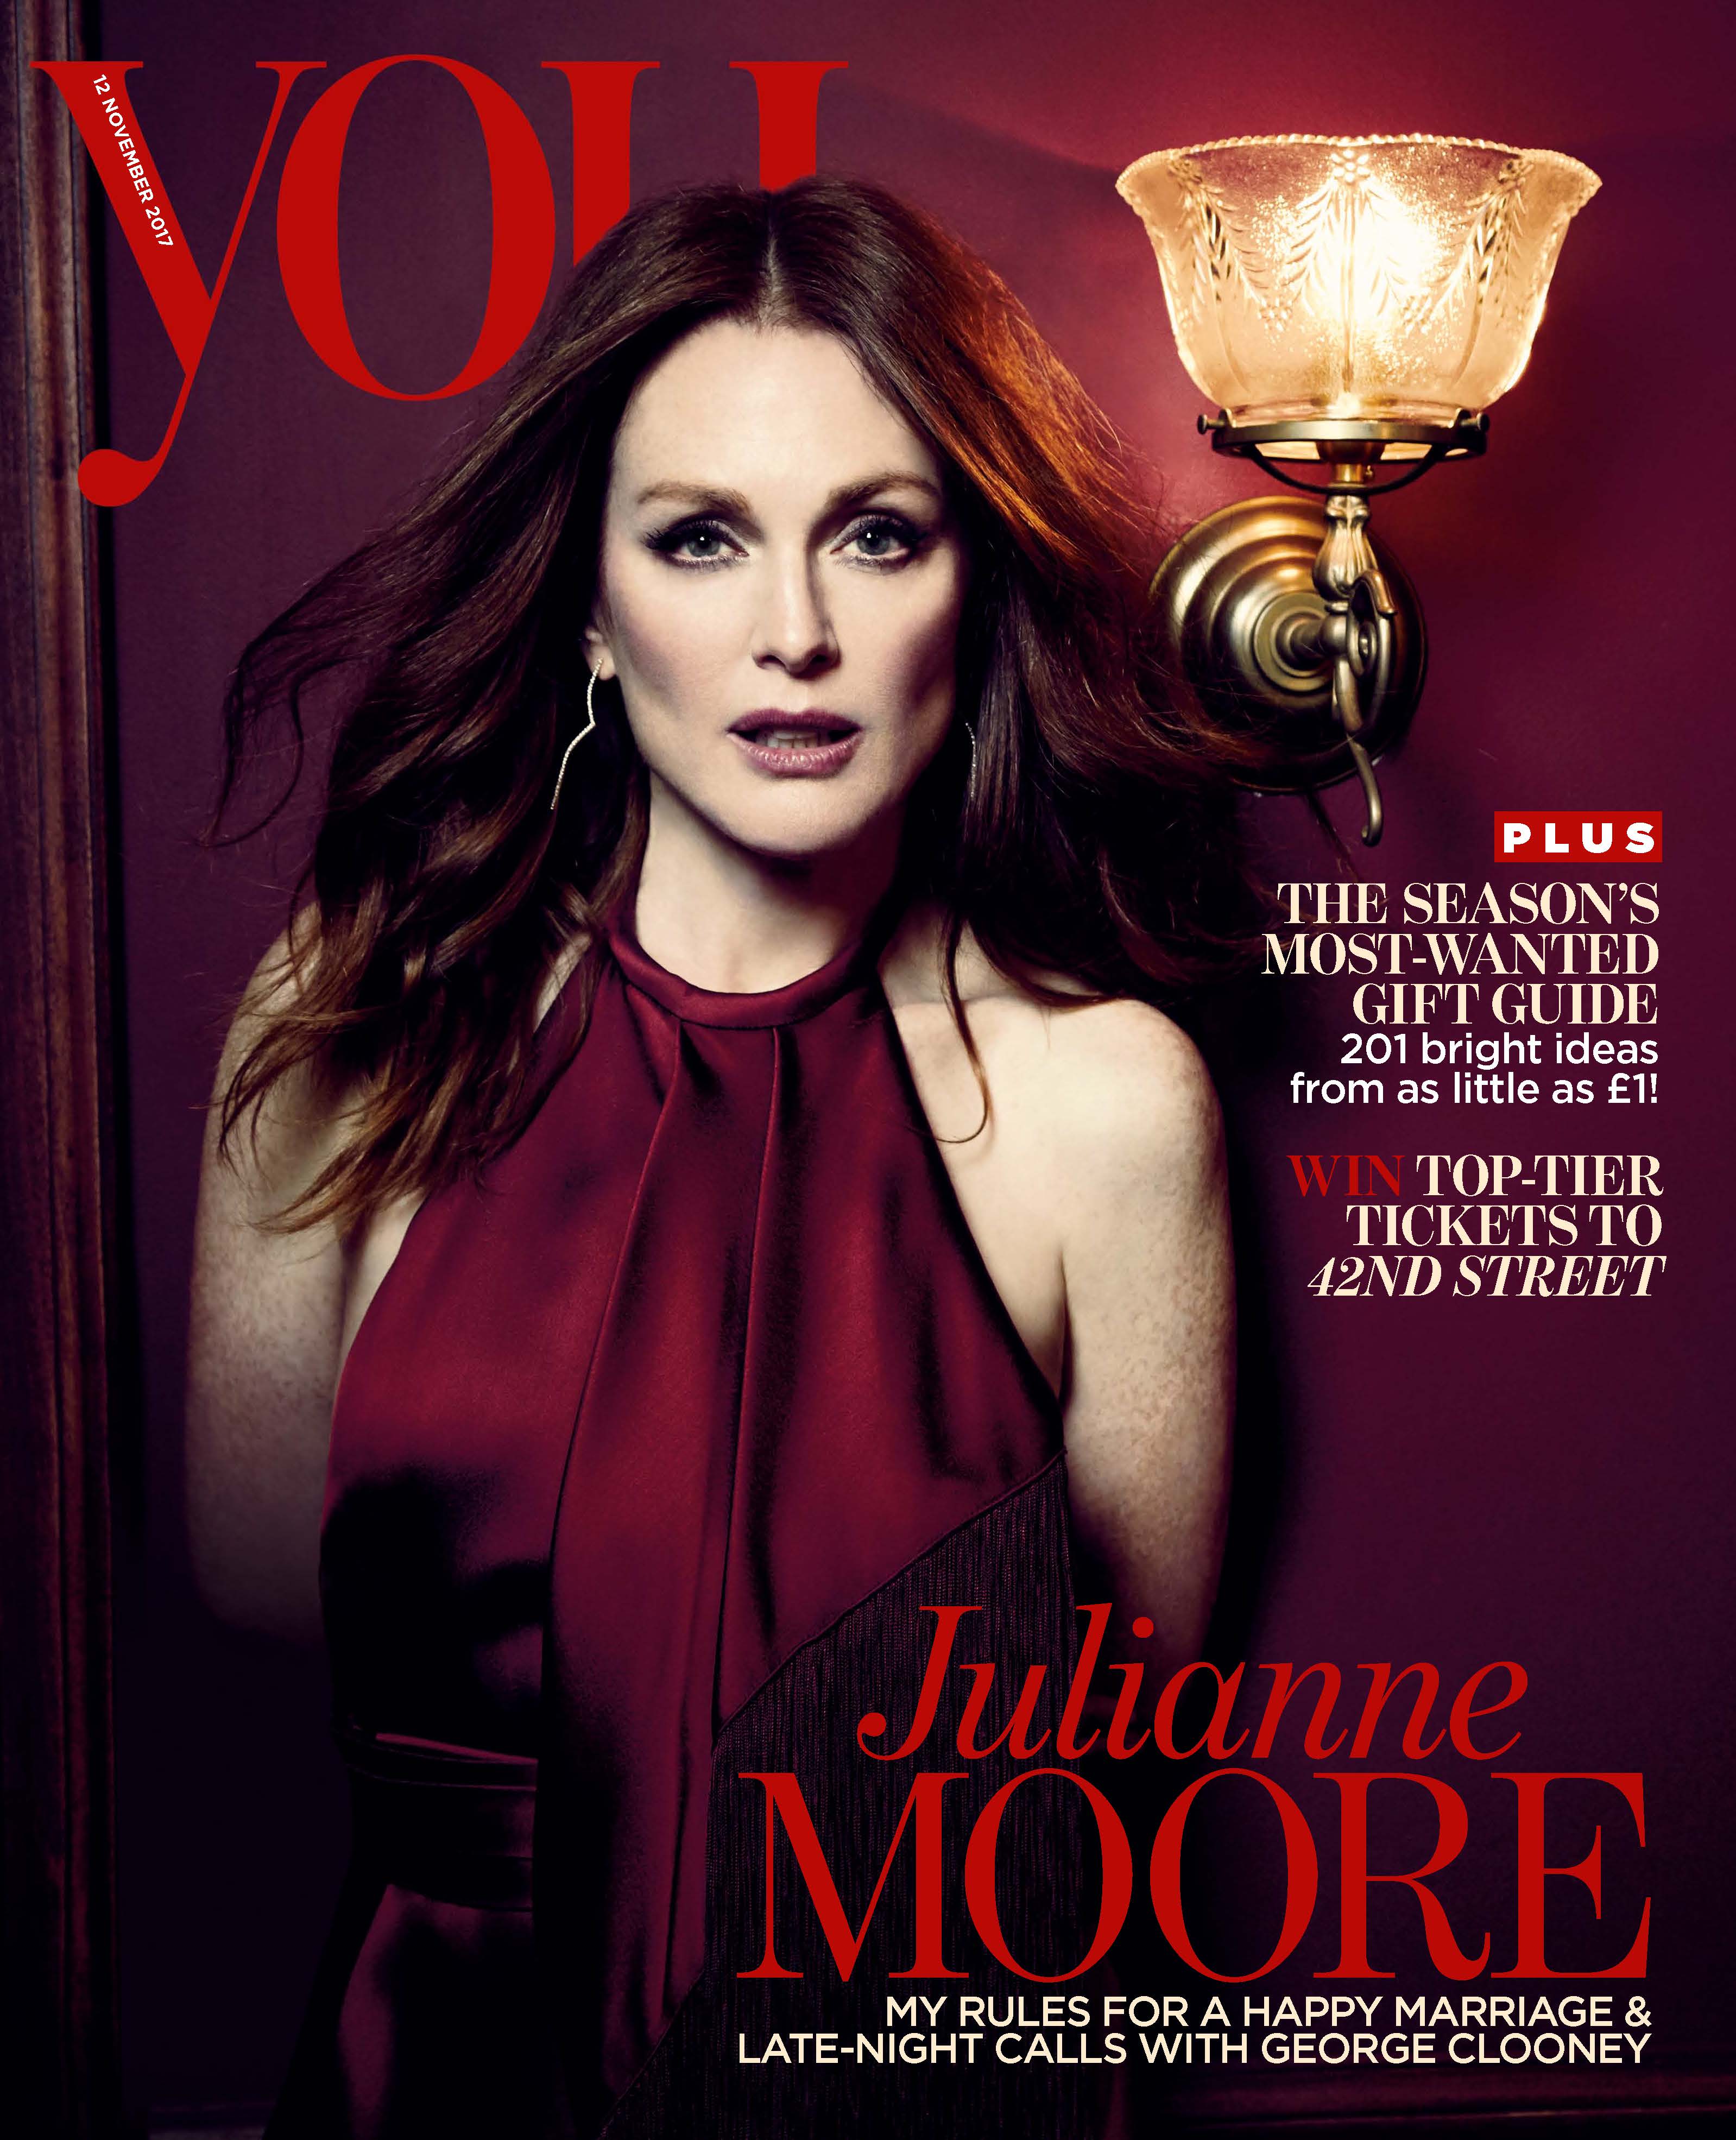 dog, dogs, style, magazine, press, editorial, you, julianne moore